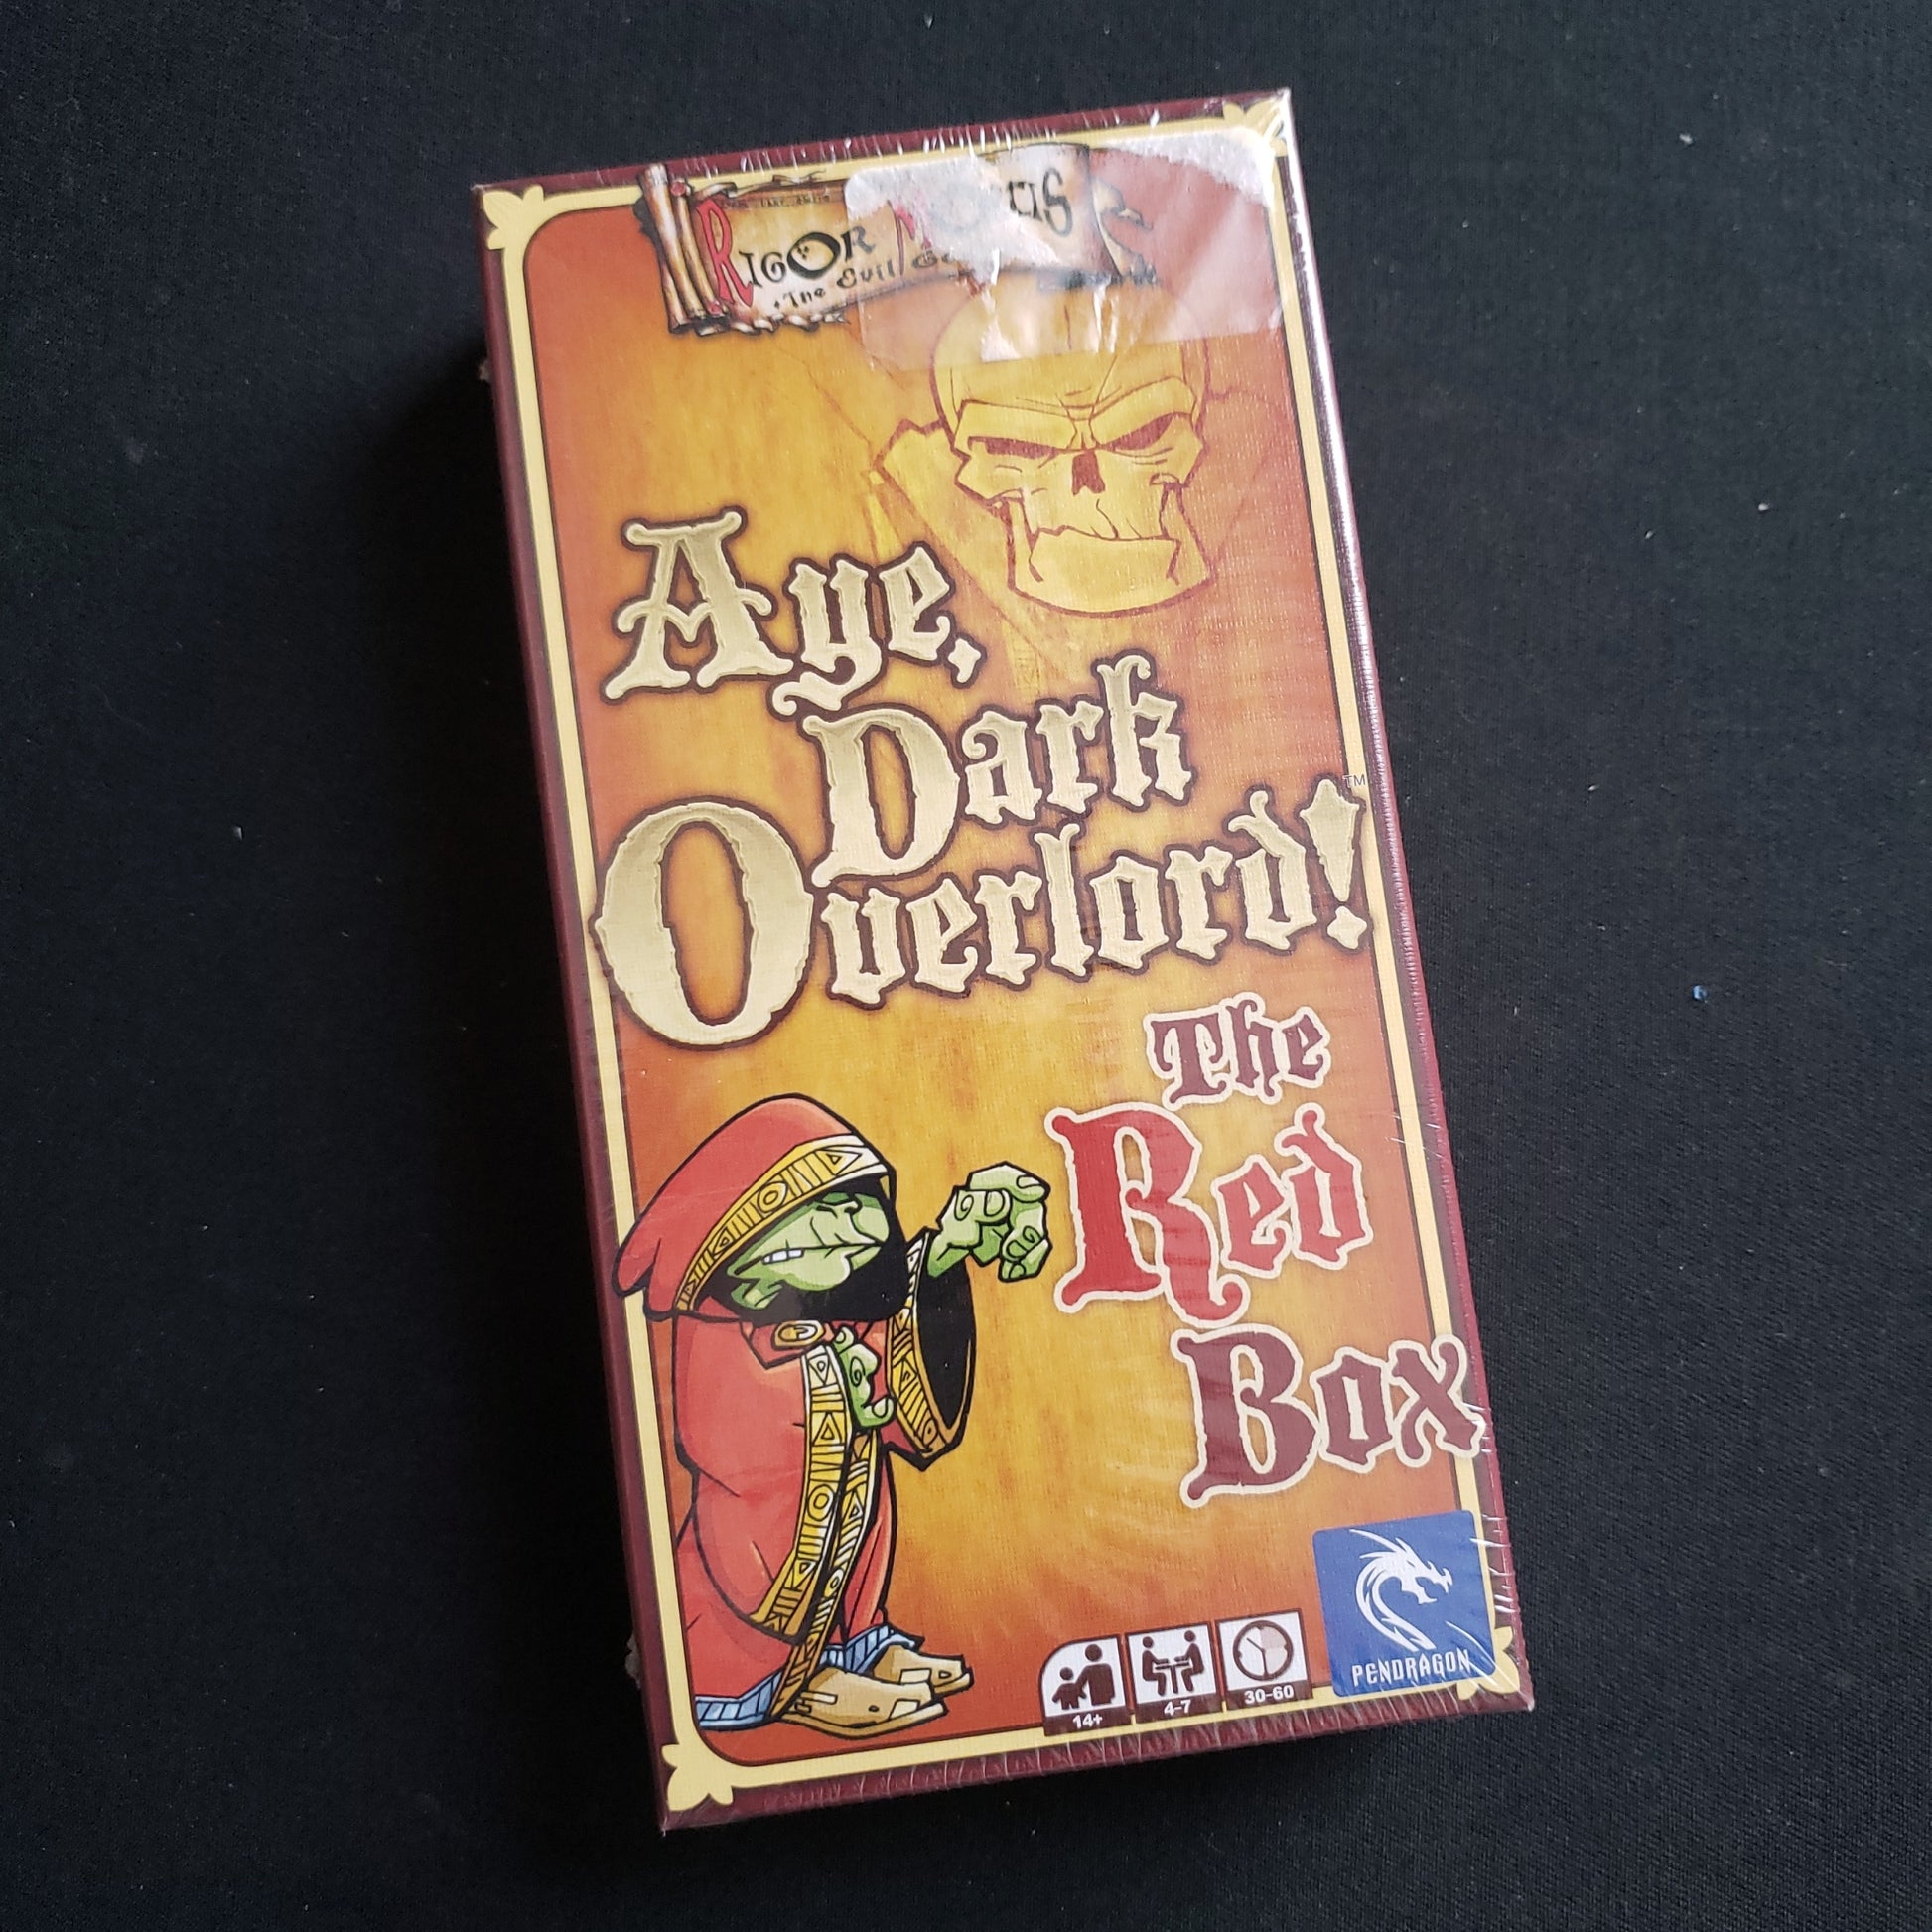 Image shows the front cover of the box of the Aye, Dark Overlord!: The Red box card game